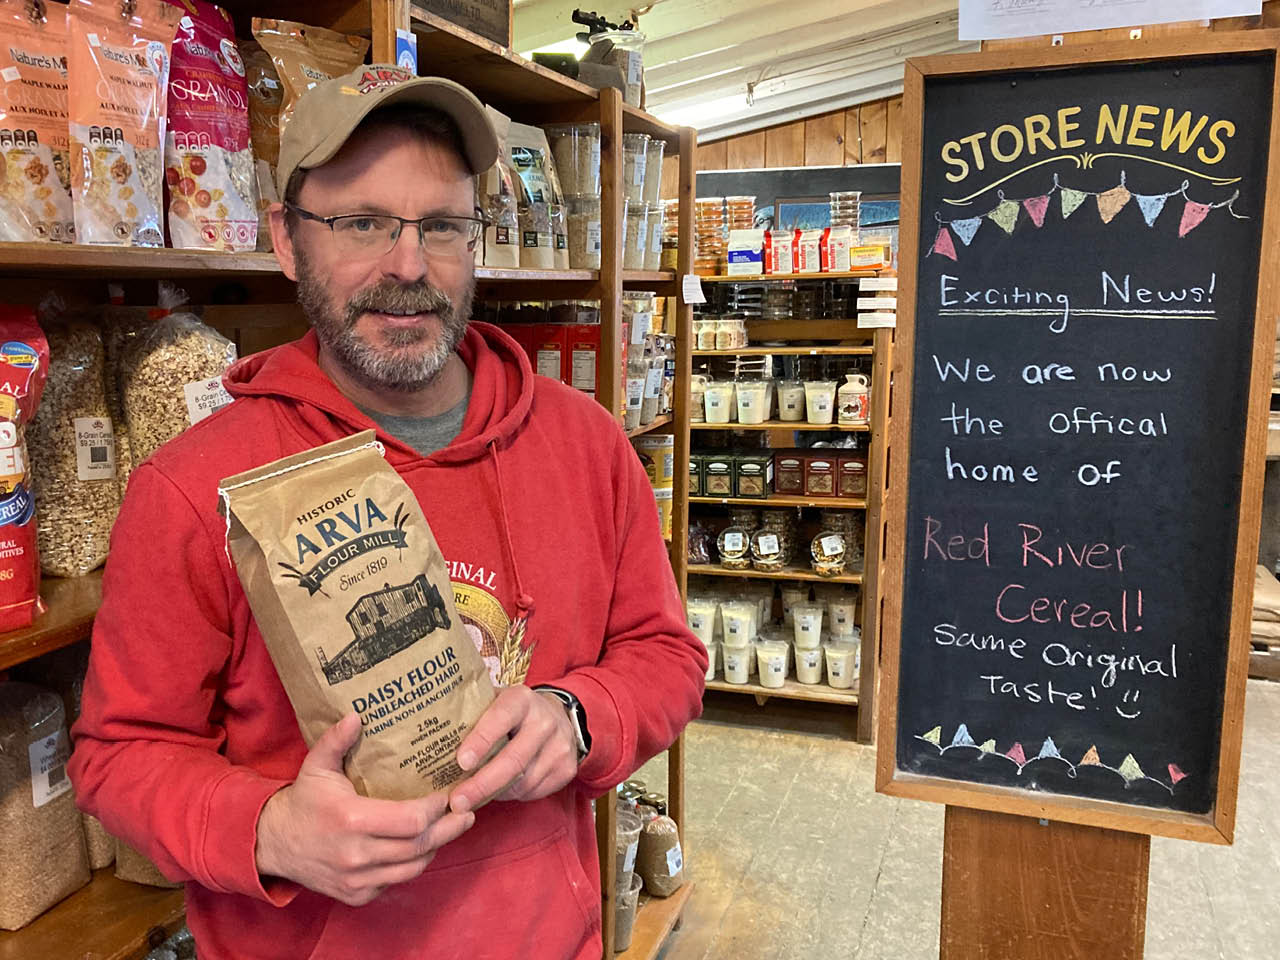 A photo of a man holding a bag of flour in a general store.